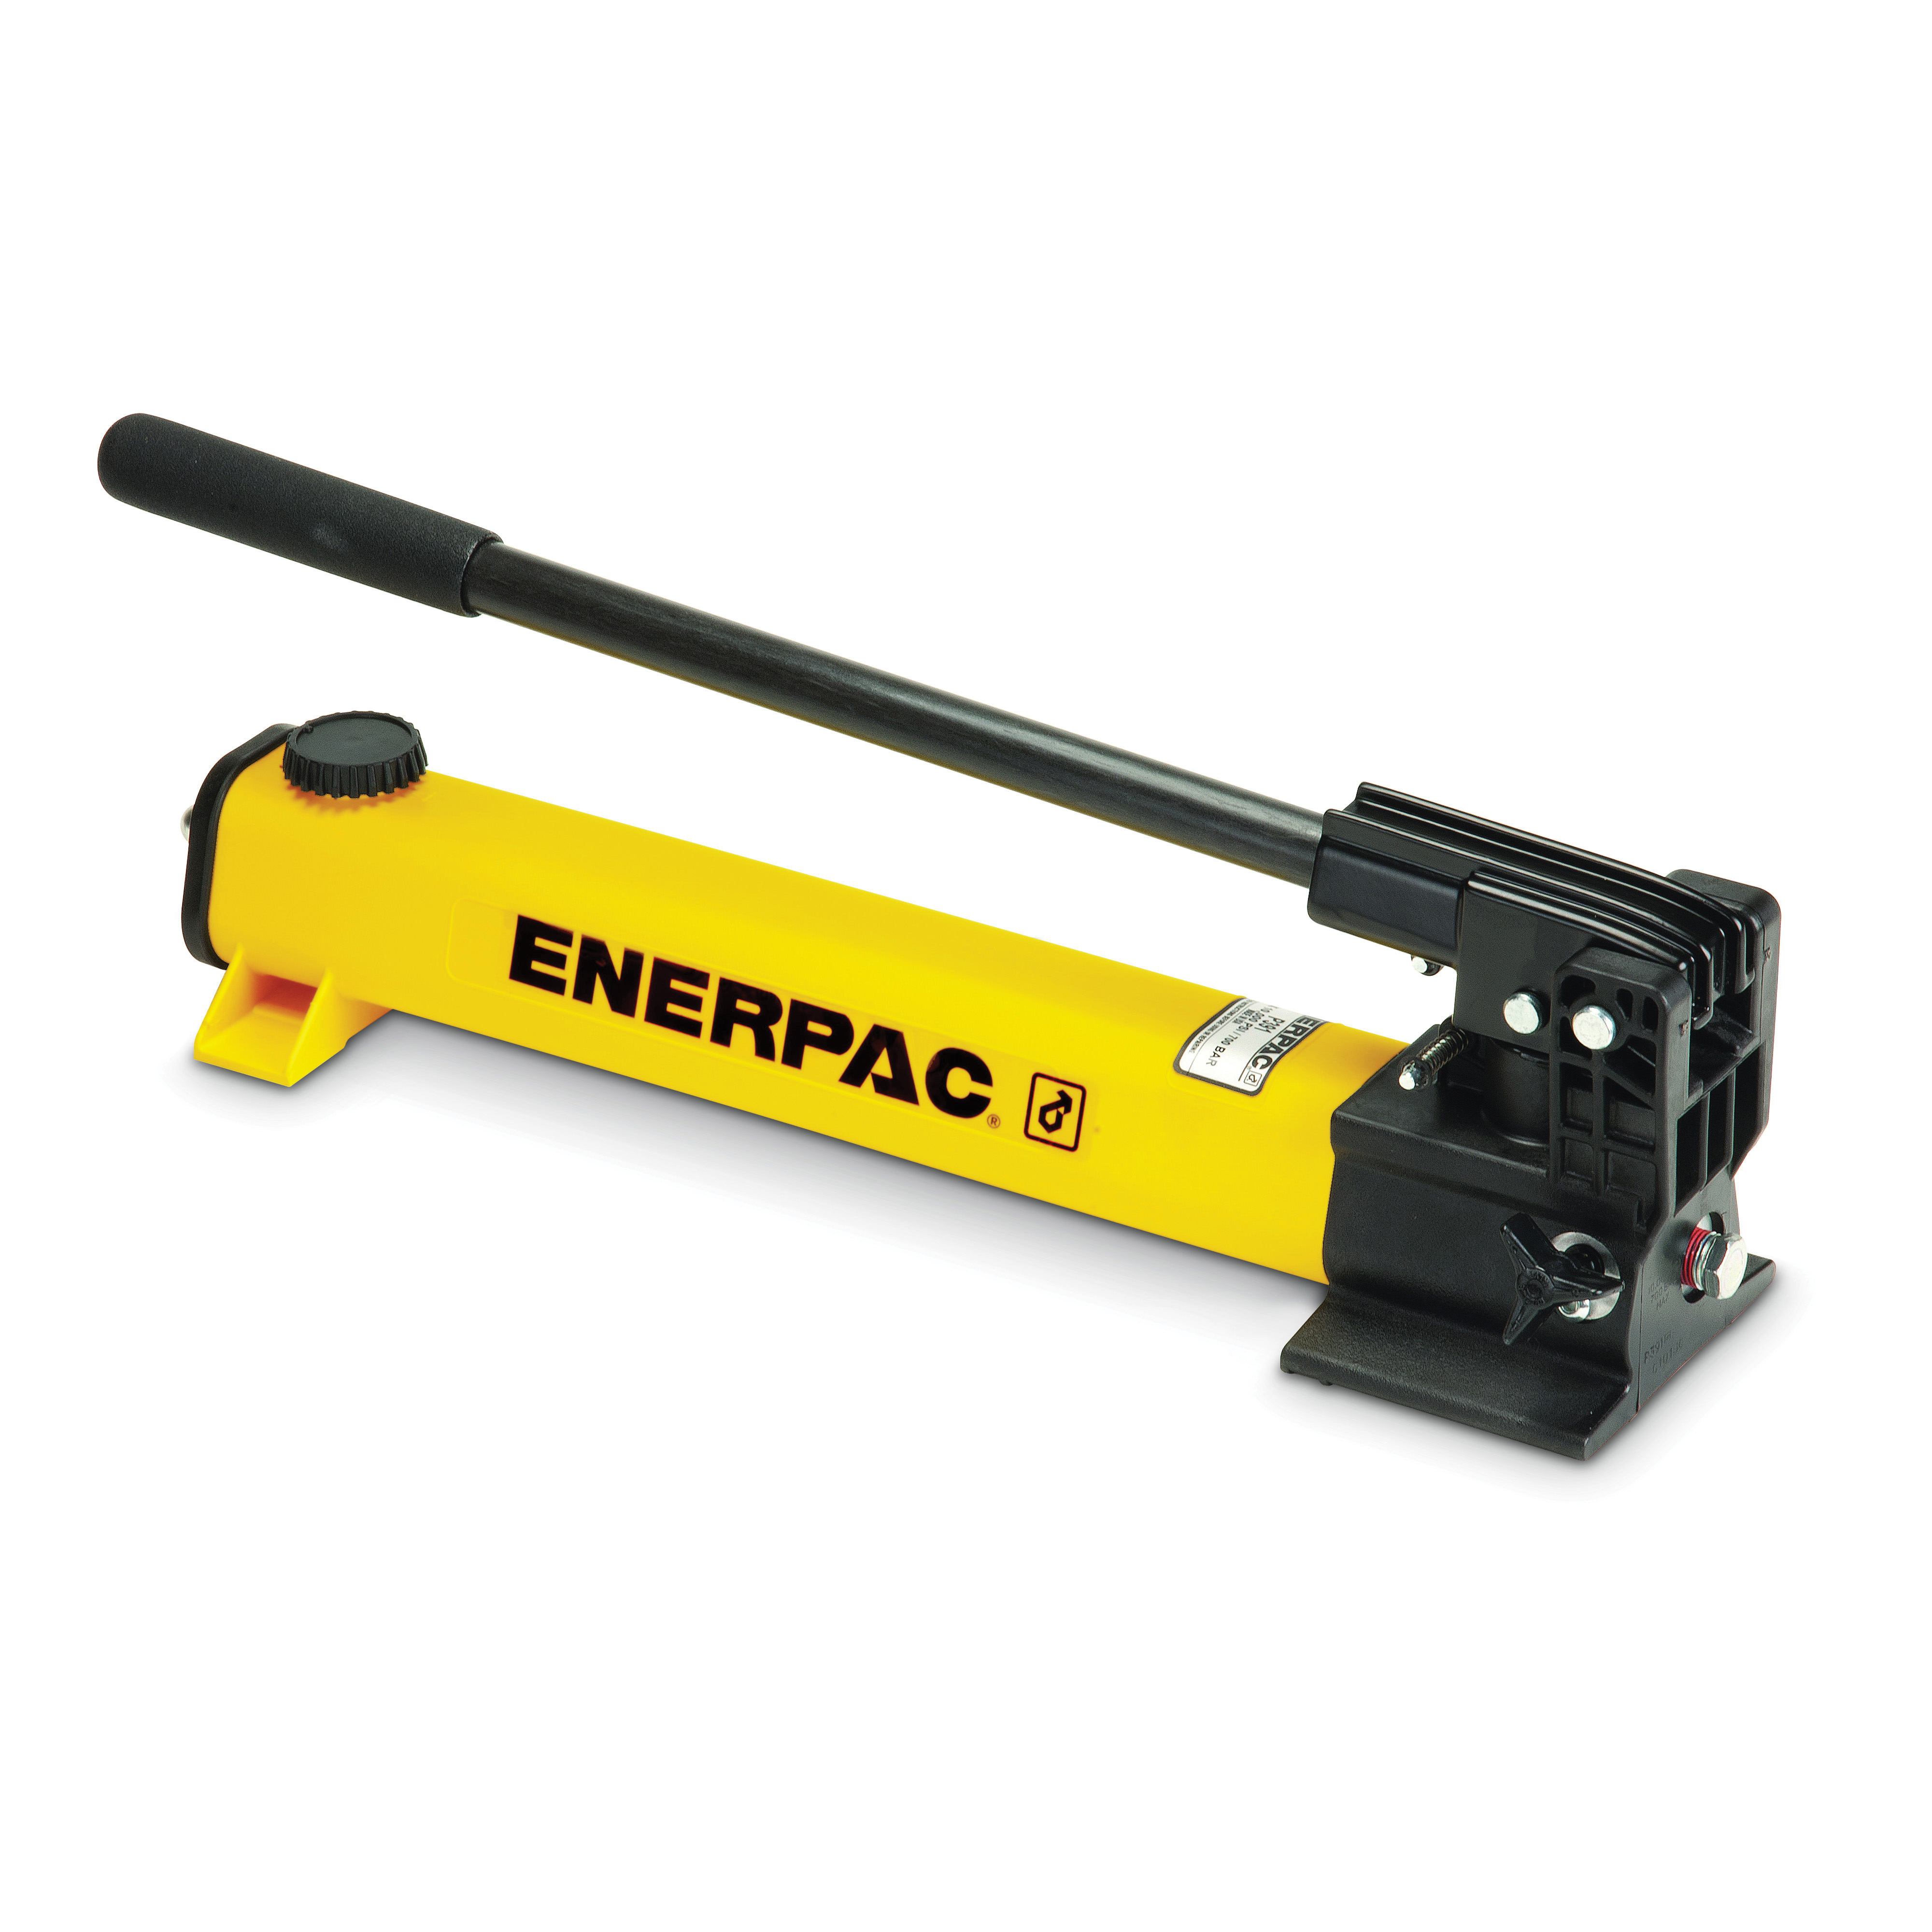 Enerpac® P-39 P-Series ULTIMA 1-Speed 1-Stage Hydraulic Hand Pump, 47 cu-in Tank